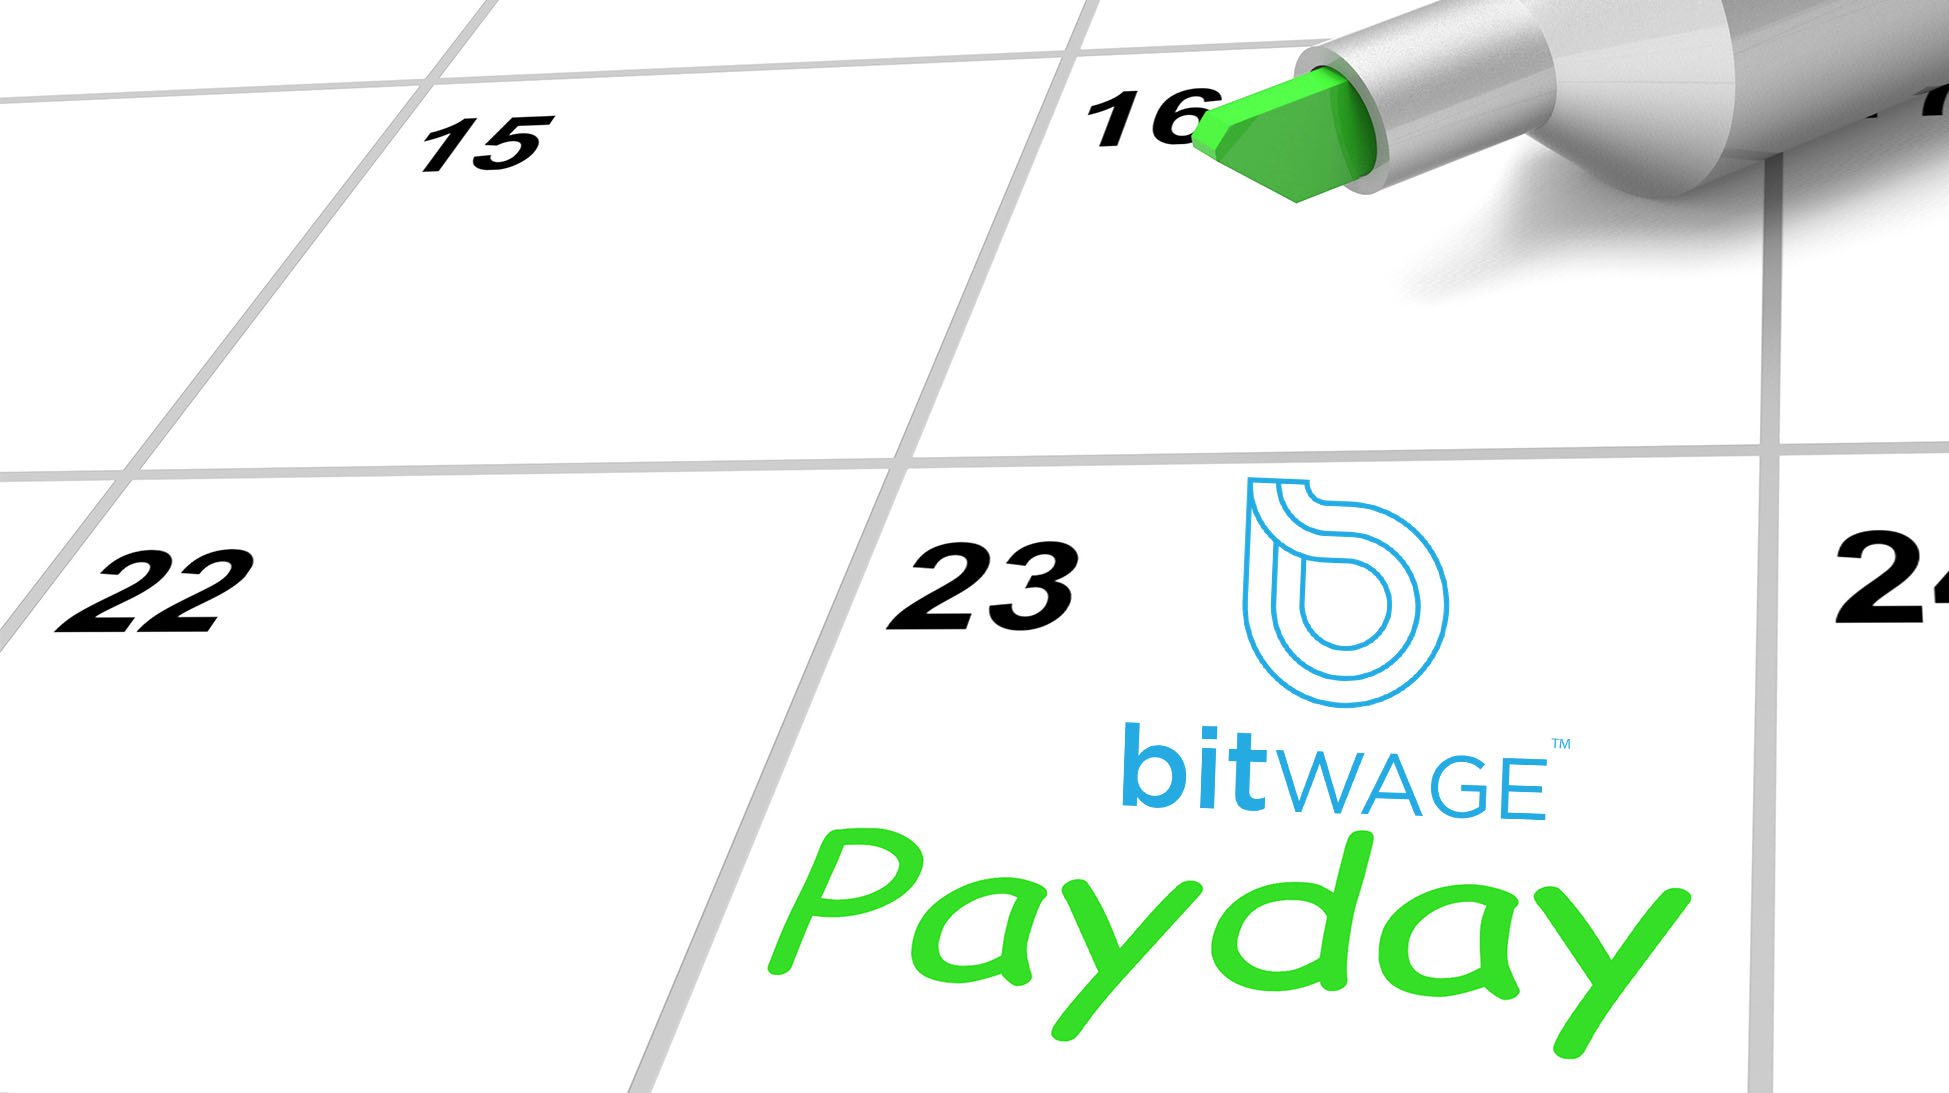 (Bitcoin Magazine) Get Your Wages in Cryptocurrencies: Bitwage Expands to the U.K.